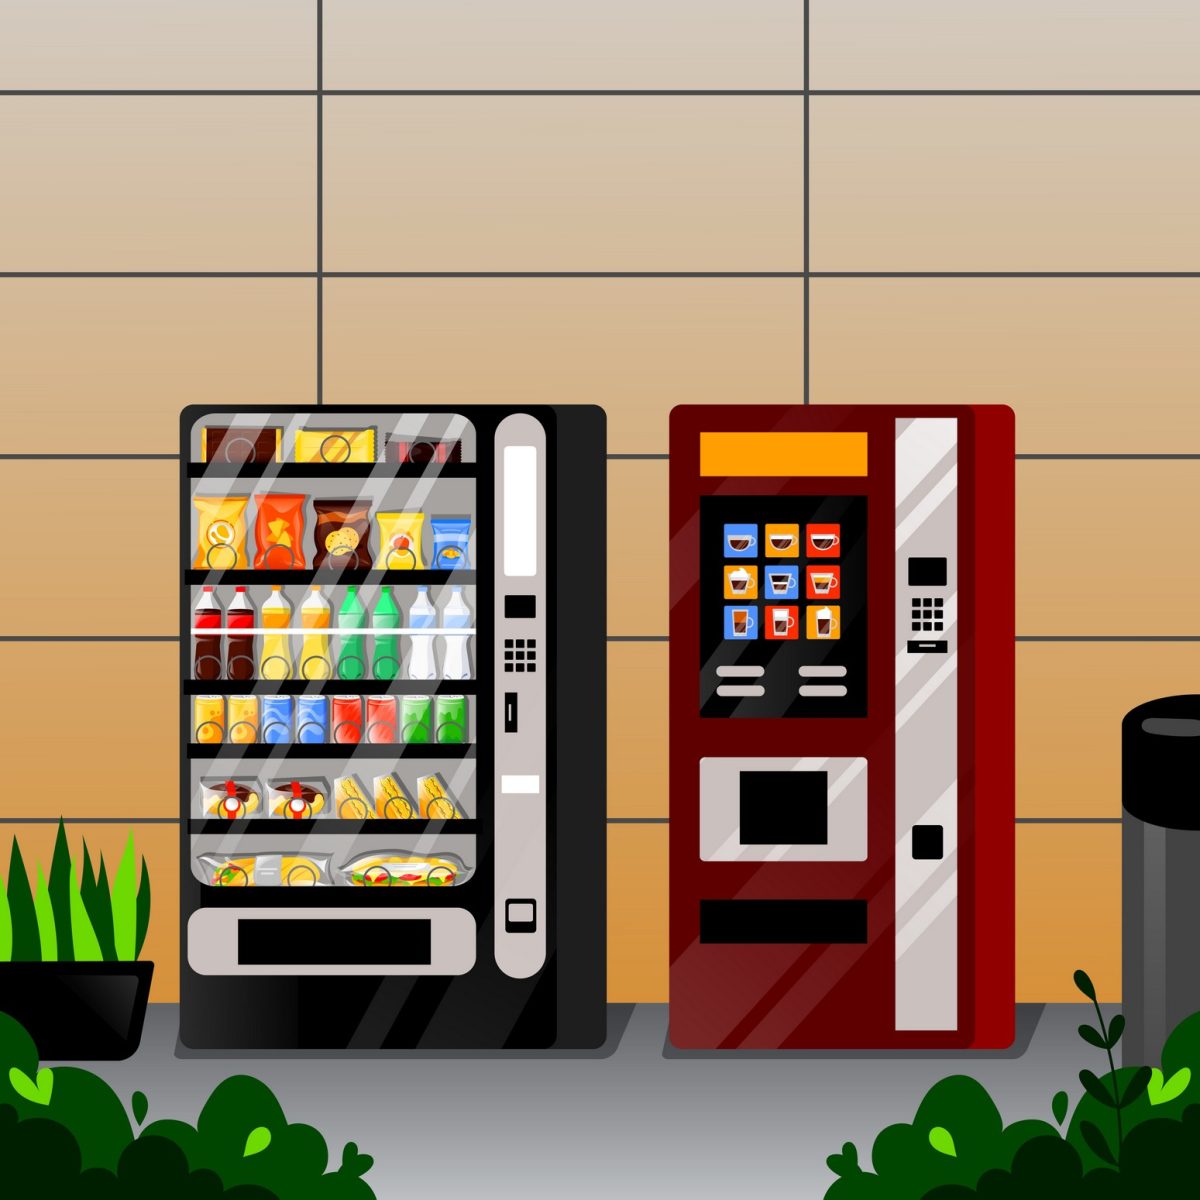 Omaha Corporate Wellness | Better-for-you Products | Healthy Vending Options